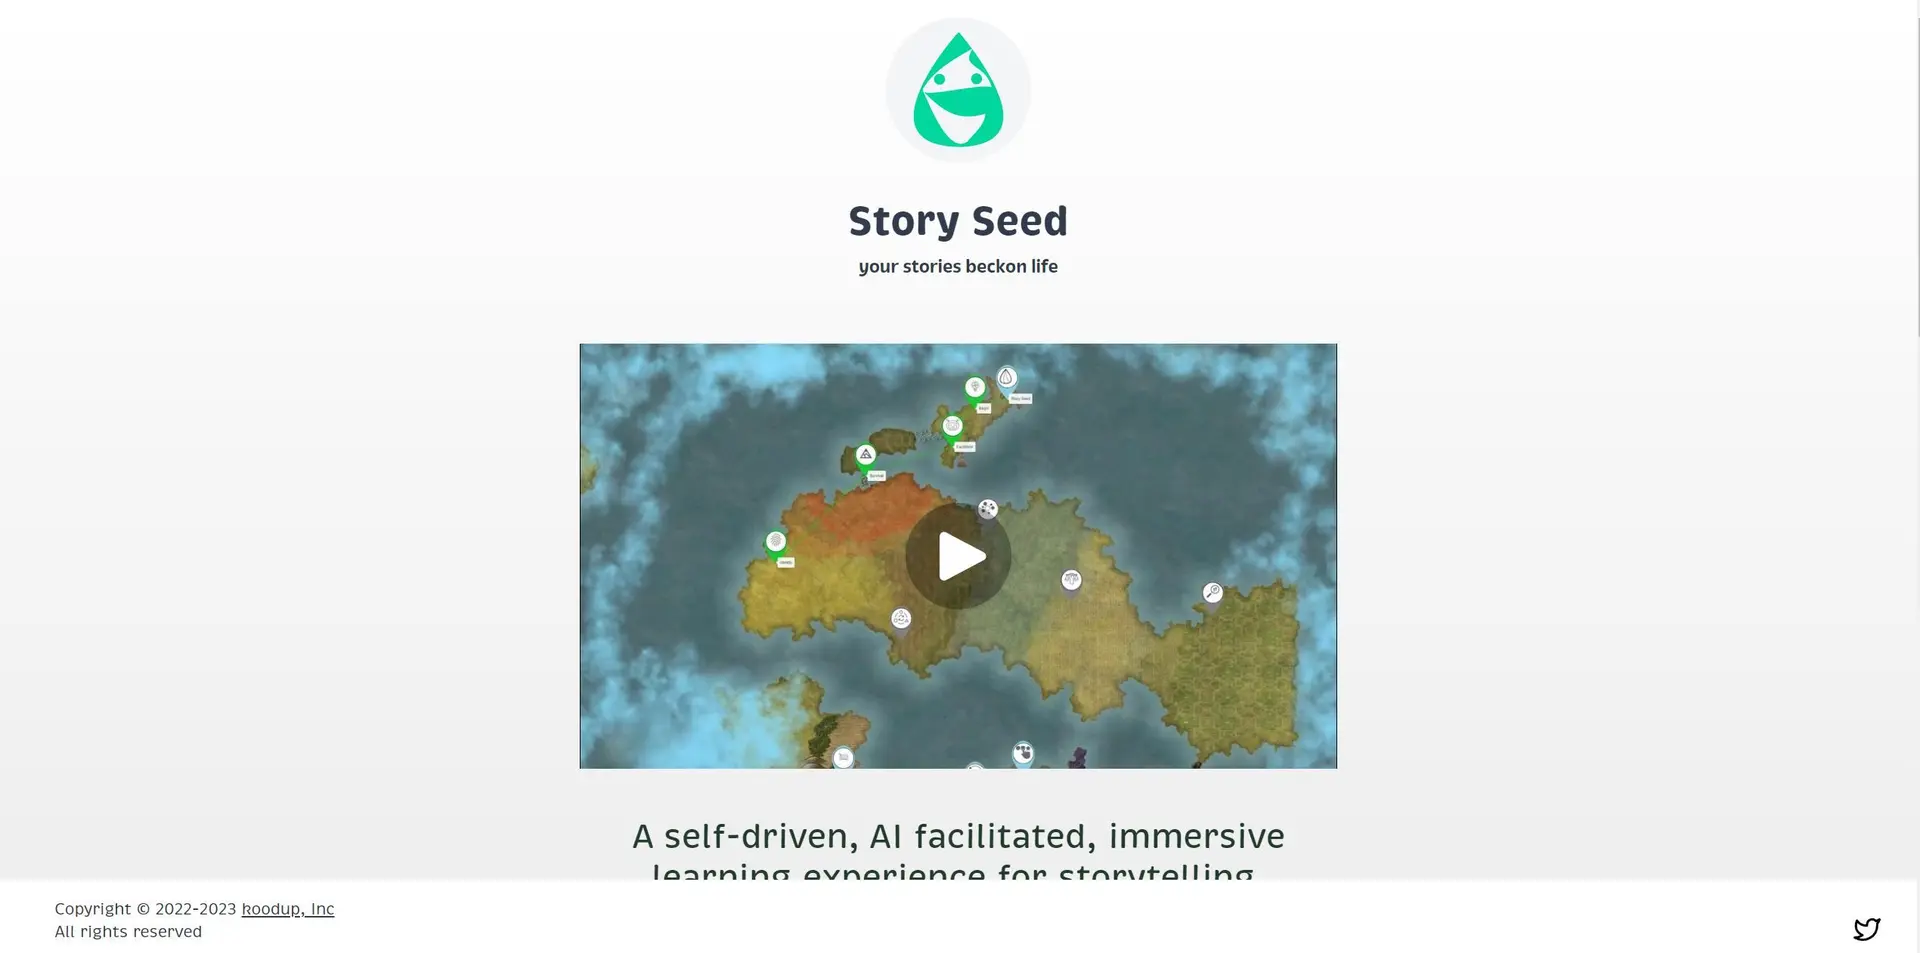 StorySeedwebsite picture